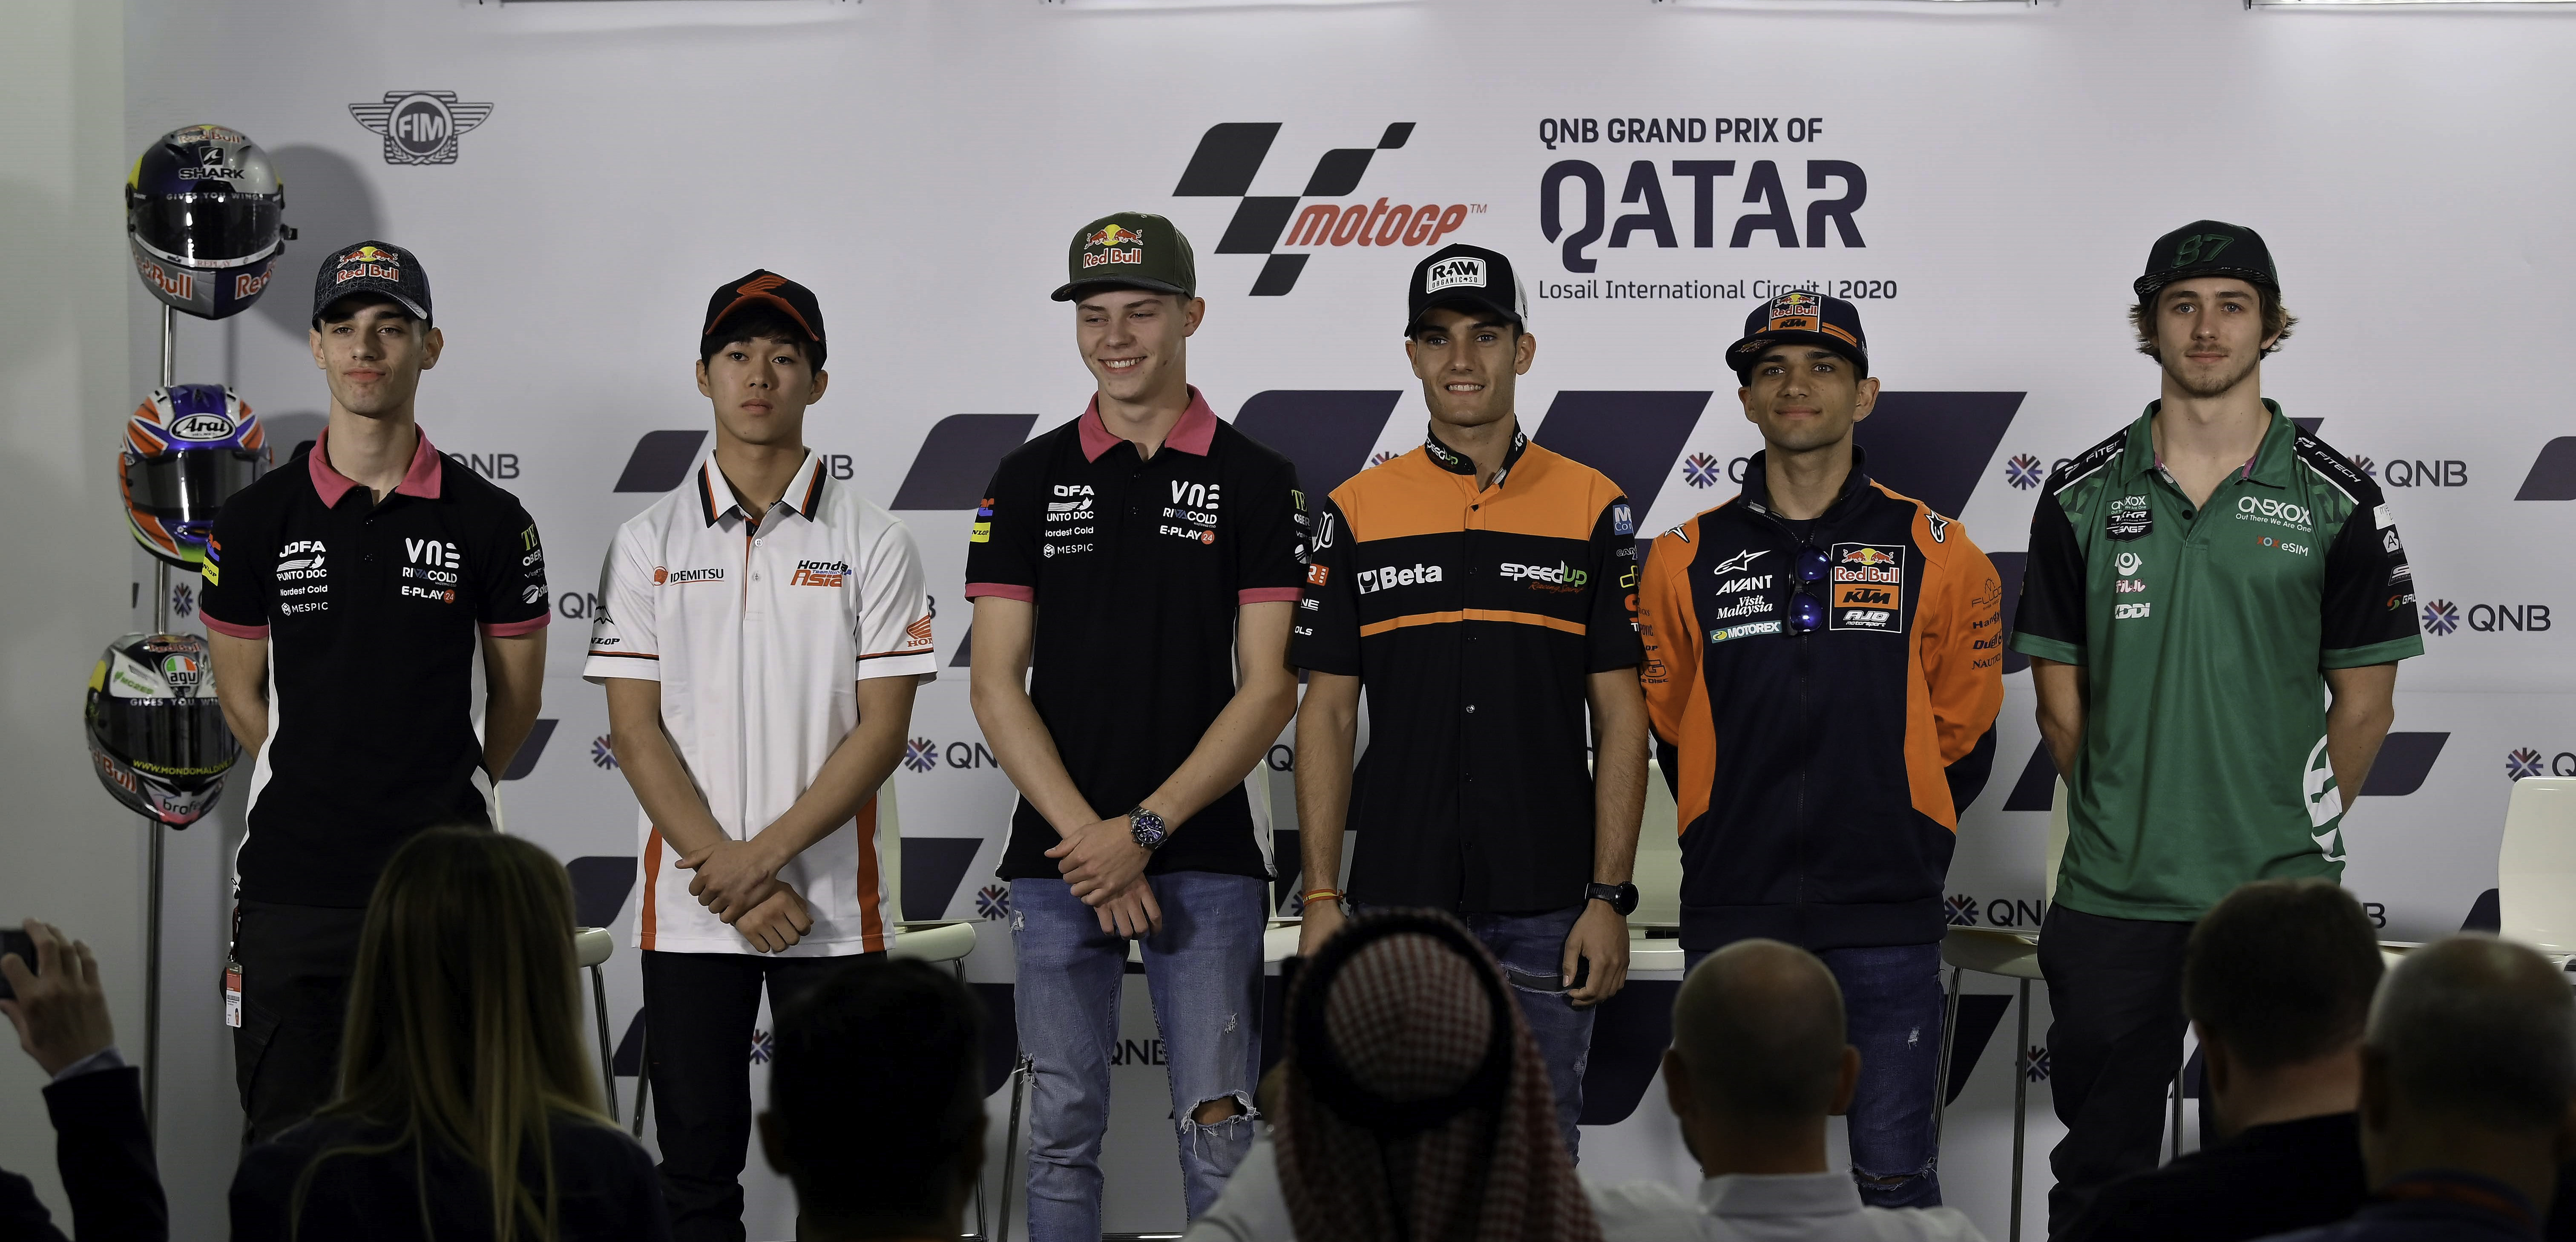 Ready, set… race! The Press Conference gets Qatar in gear